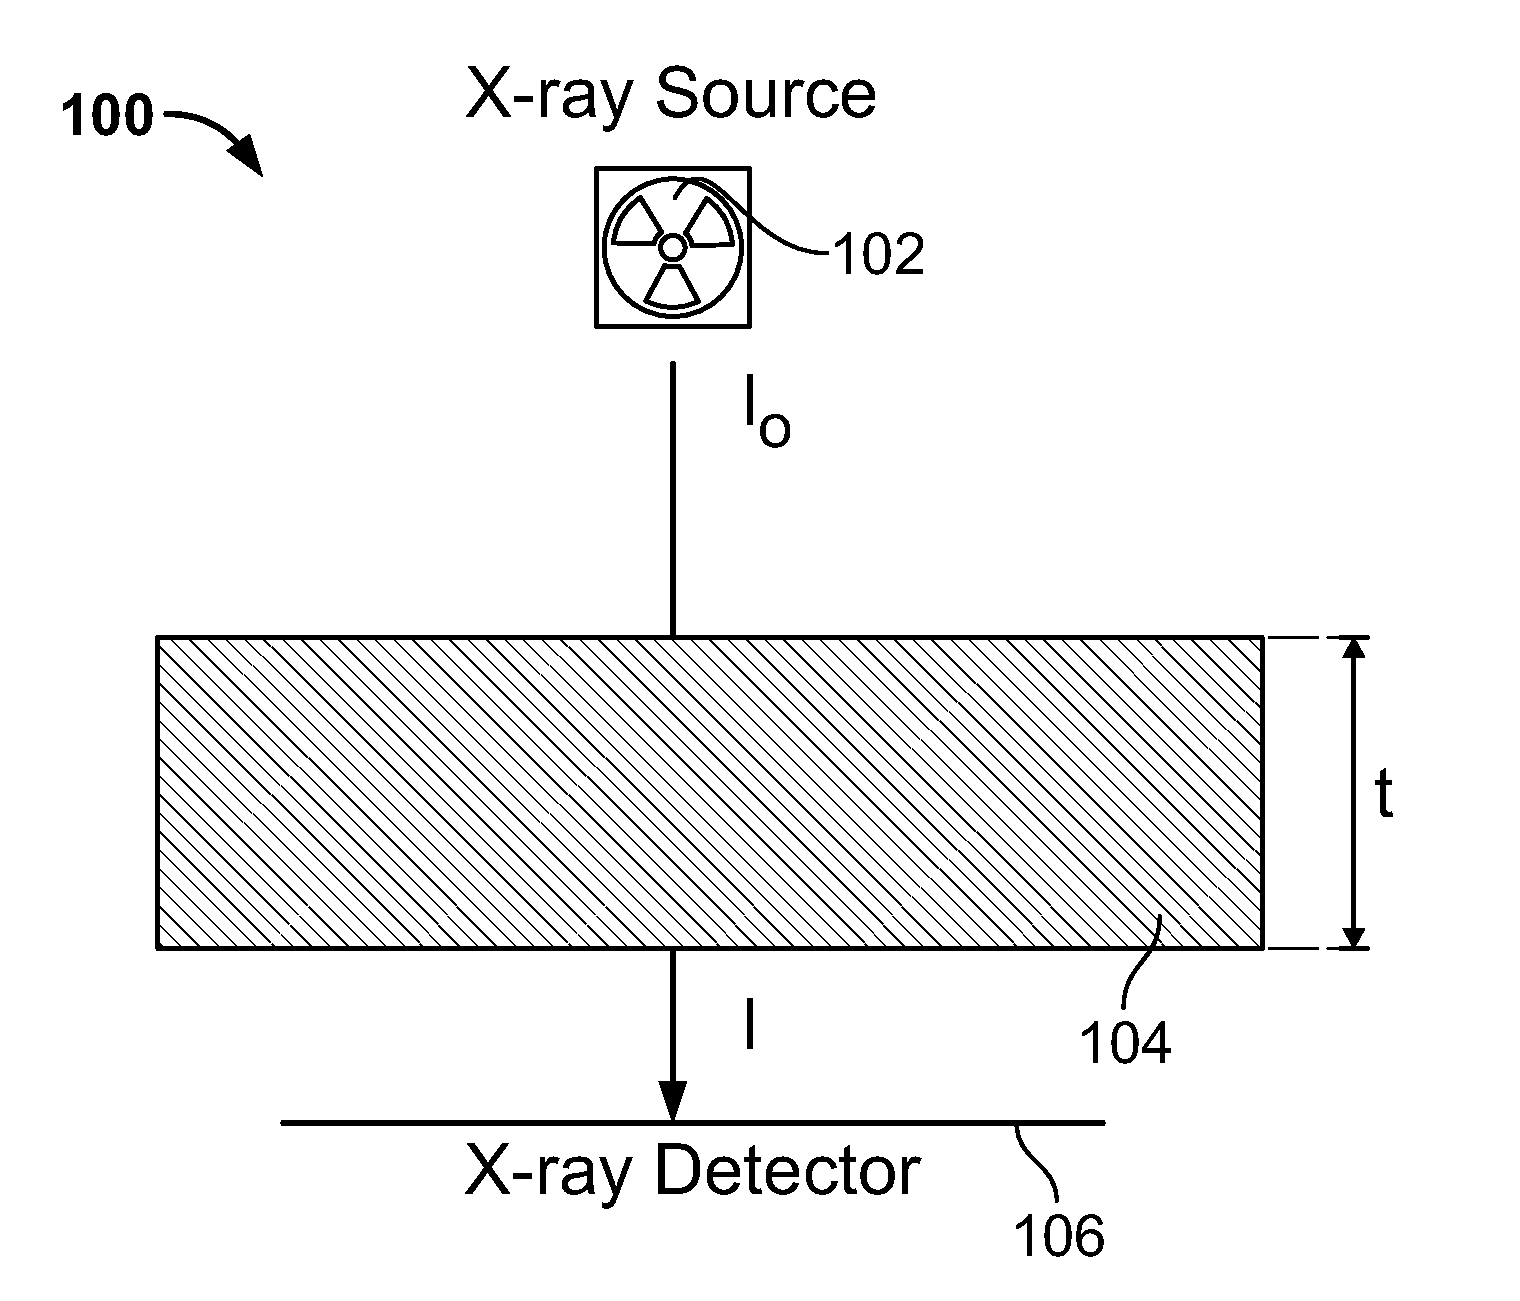 Method for Consistent and Verifiable Optimization of Computed Tomography (CT) Radiation Dose